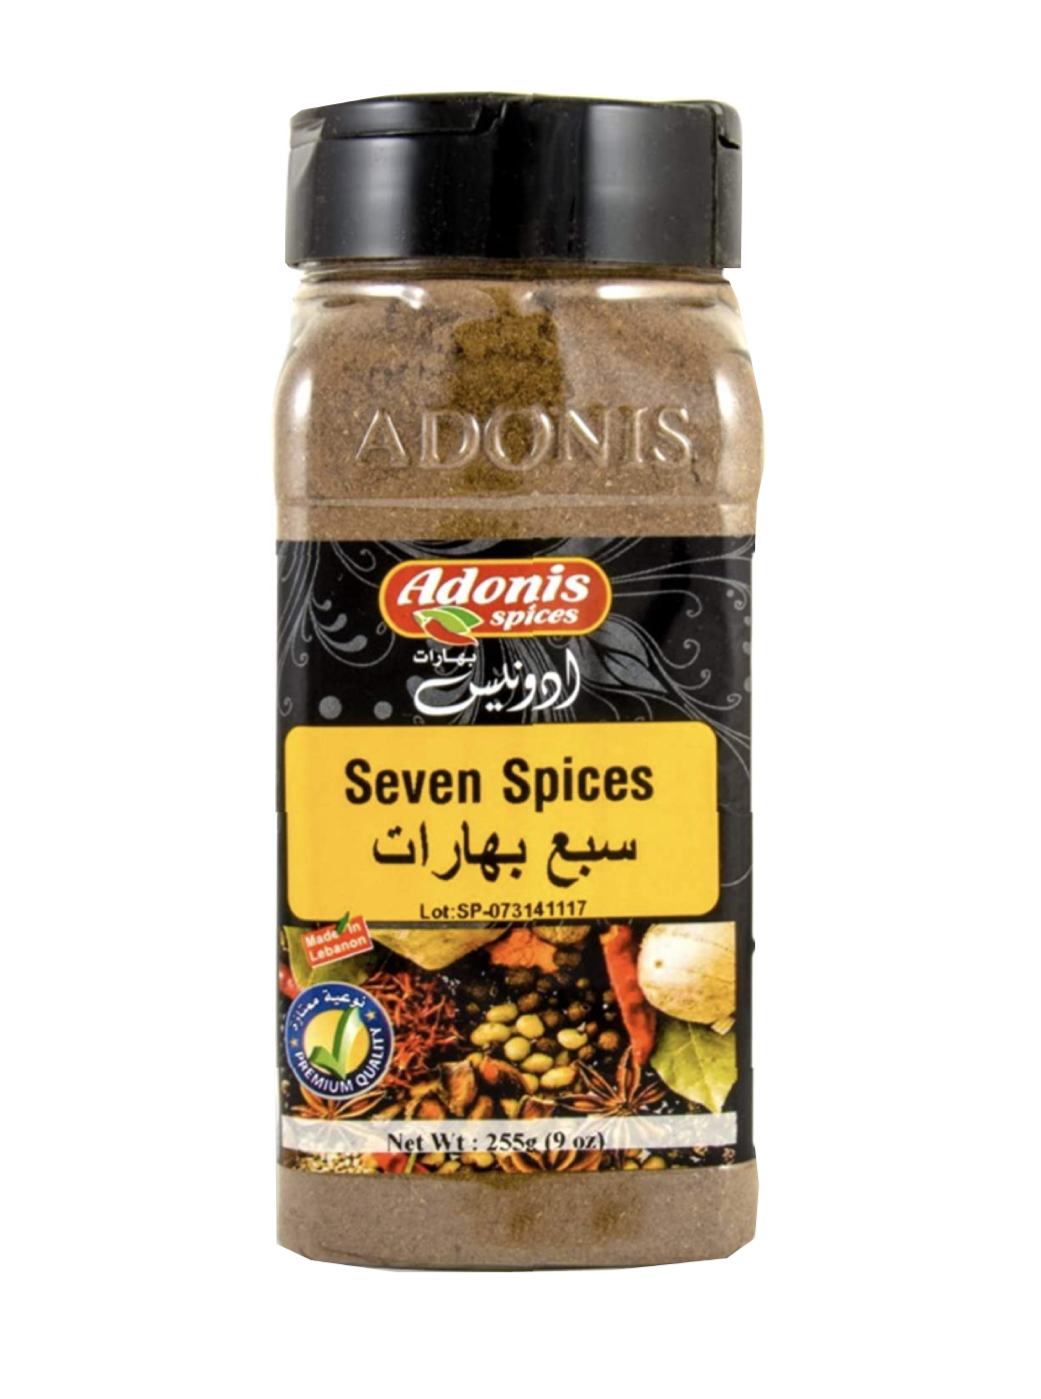 Adonis - Seven Spice 255g (Case of 12)